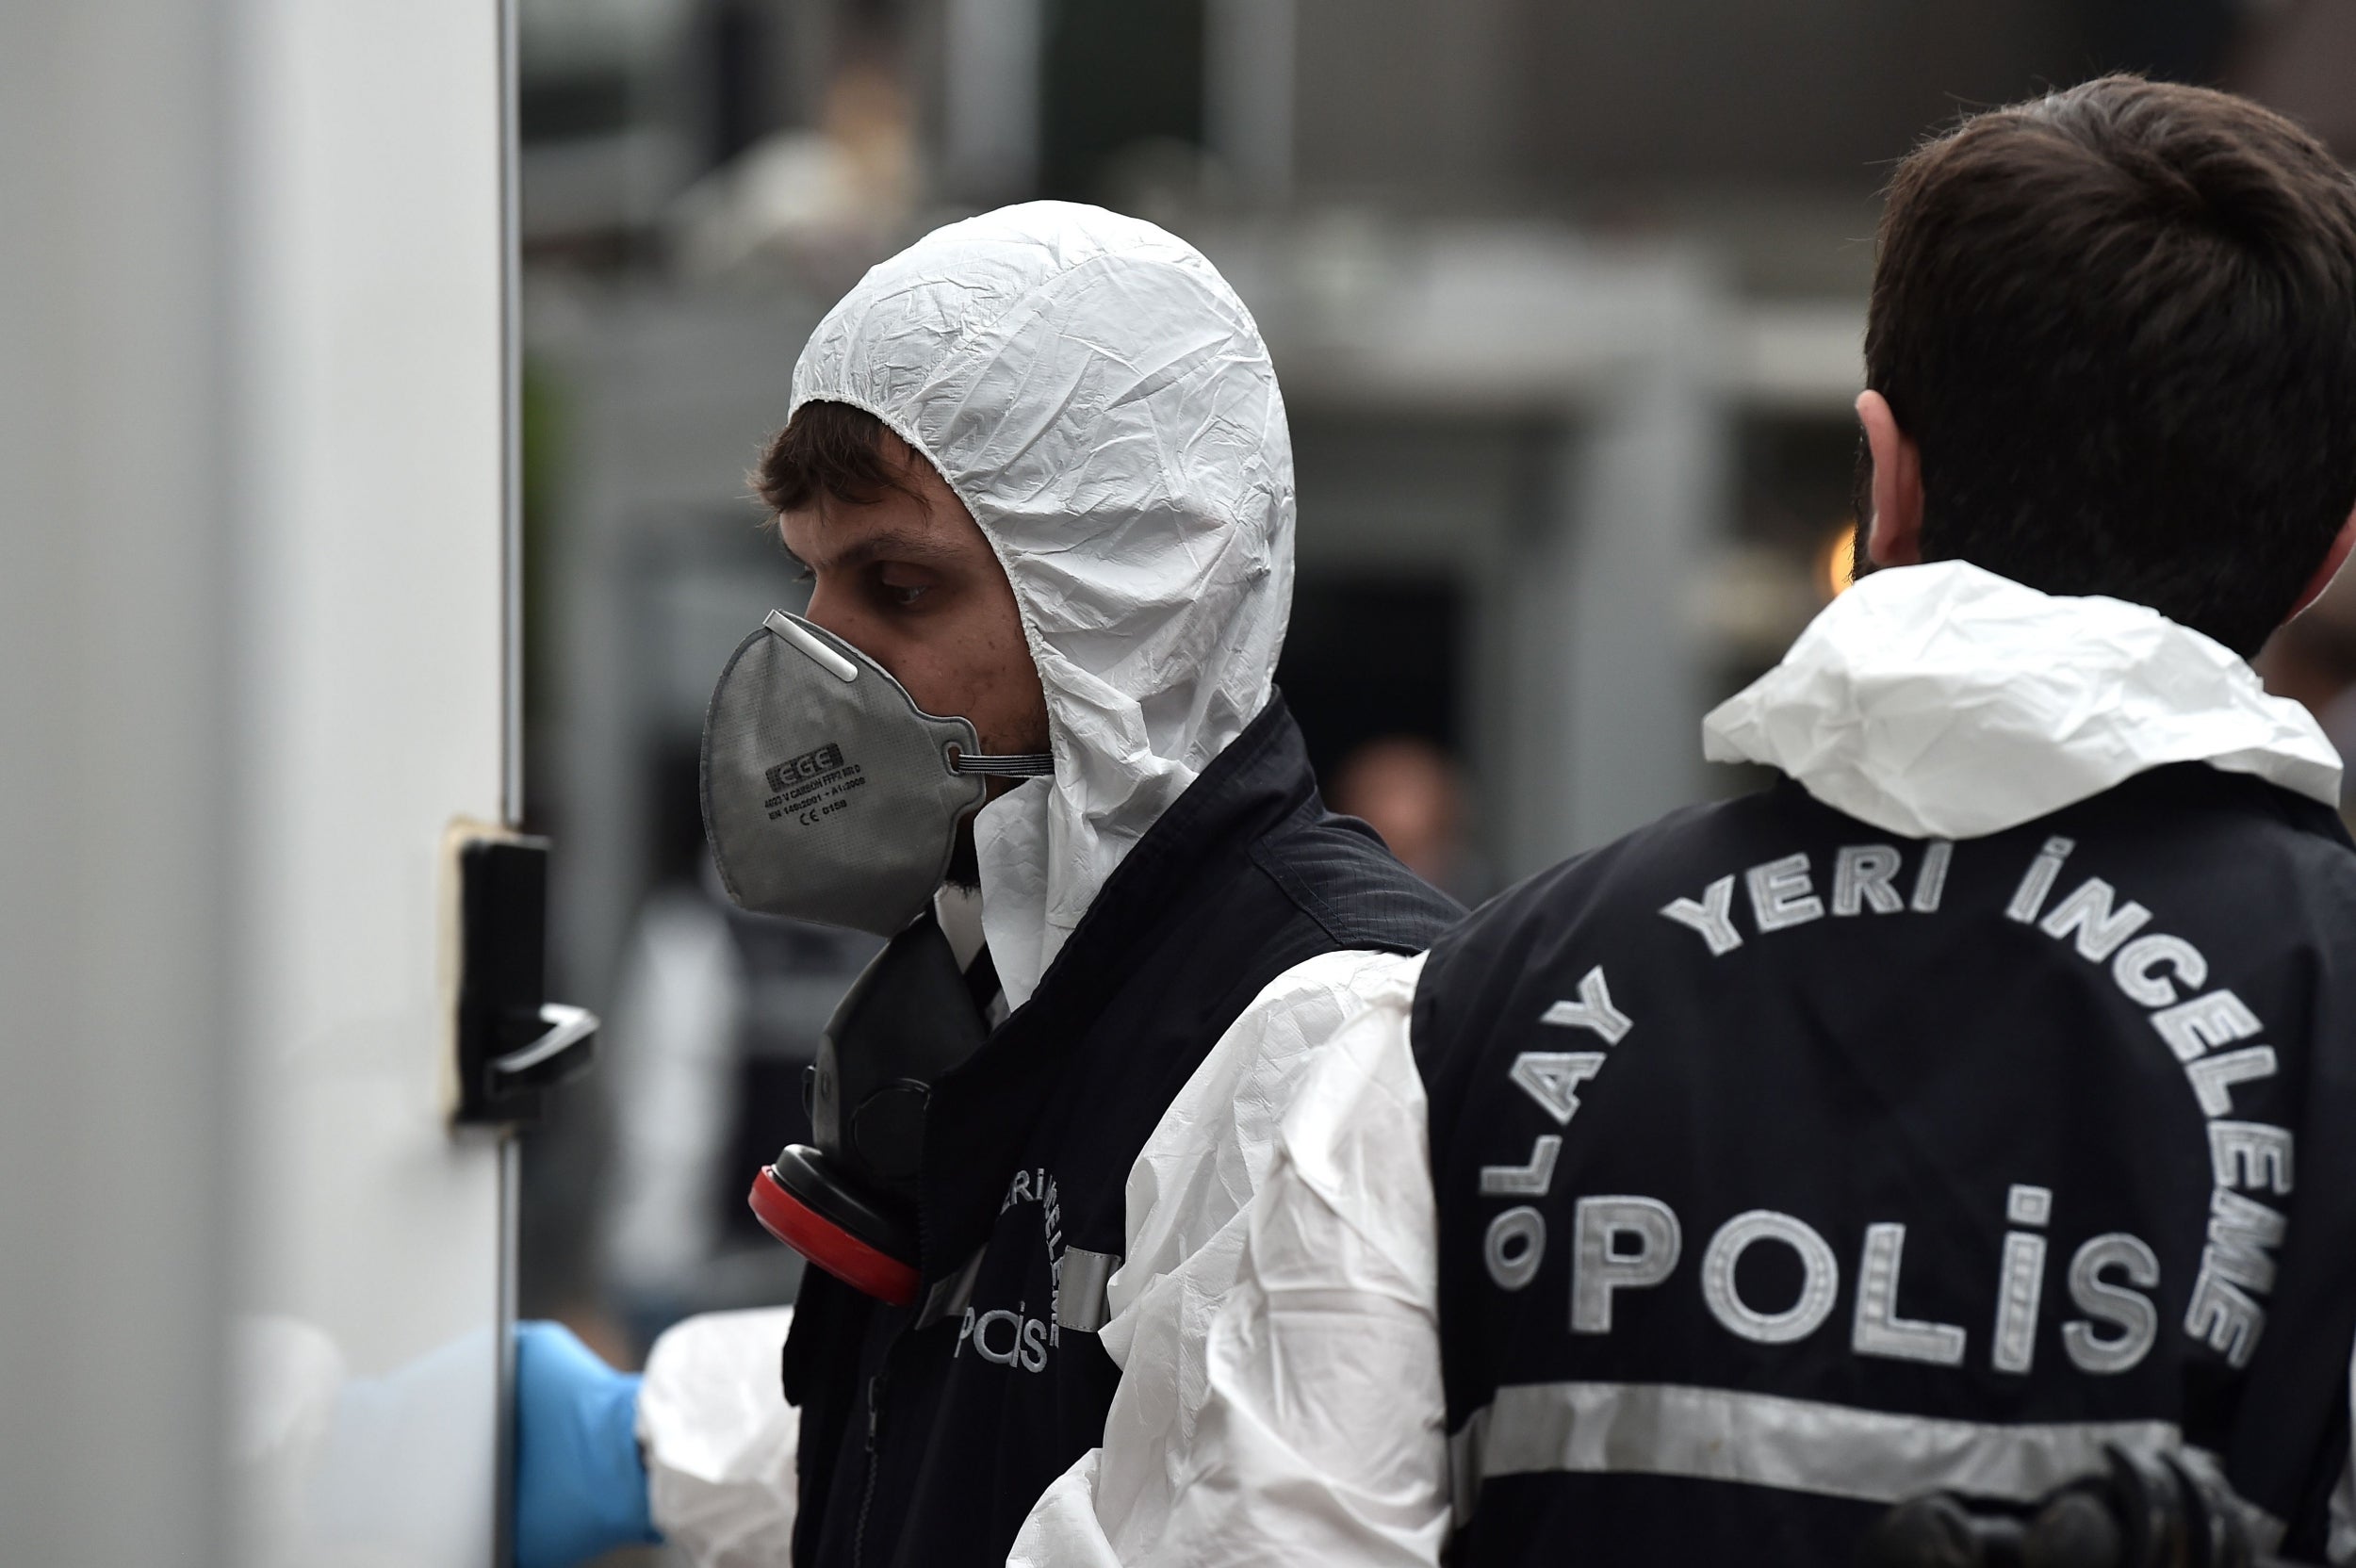 Turkish forensic and investigation officers arrive at Saudi consul’s residence in Istanbul